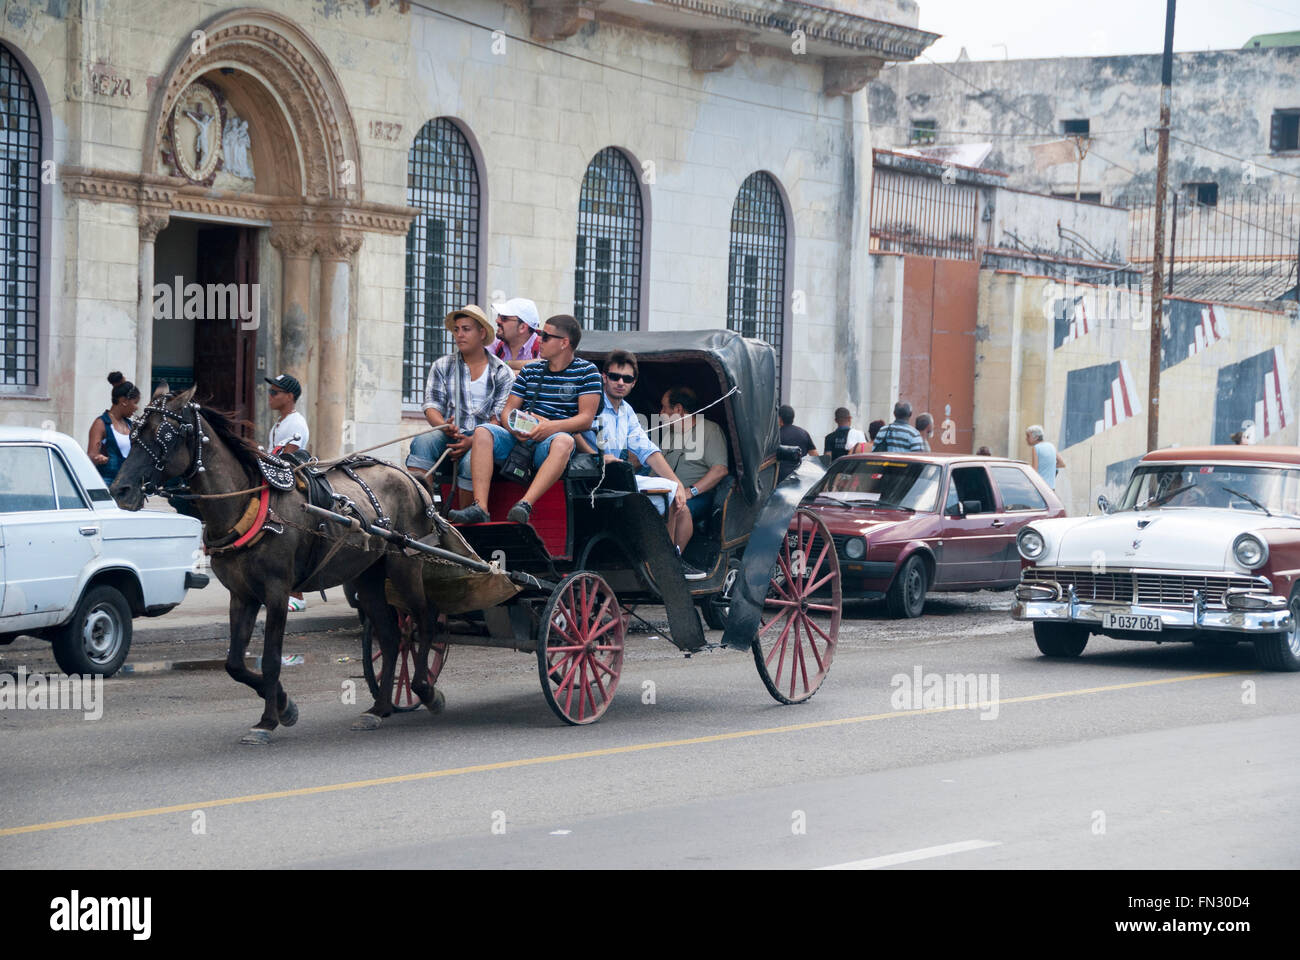 A horse drawn carriage followed by a vintage Ford Fairlane escort tourists on the famous Malecon in Havana Cuba. Stock Photo